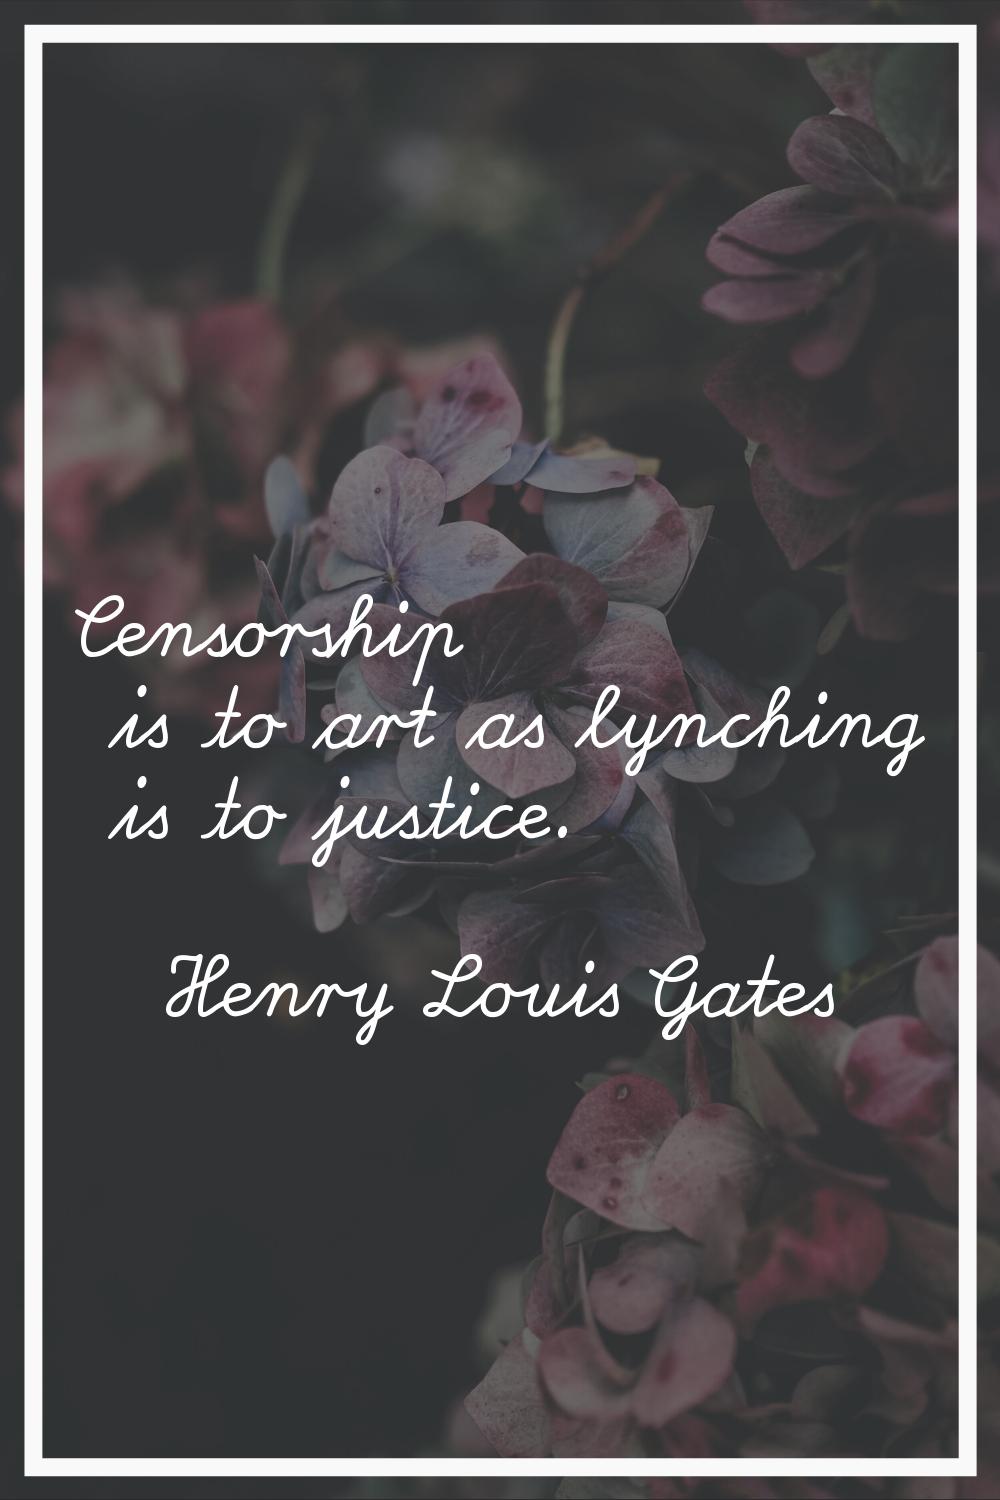 Censorship is to art as lynching is to justice.